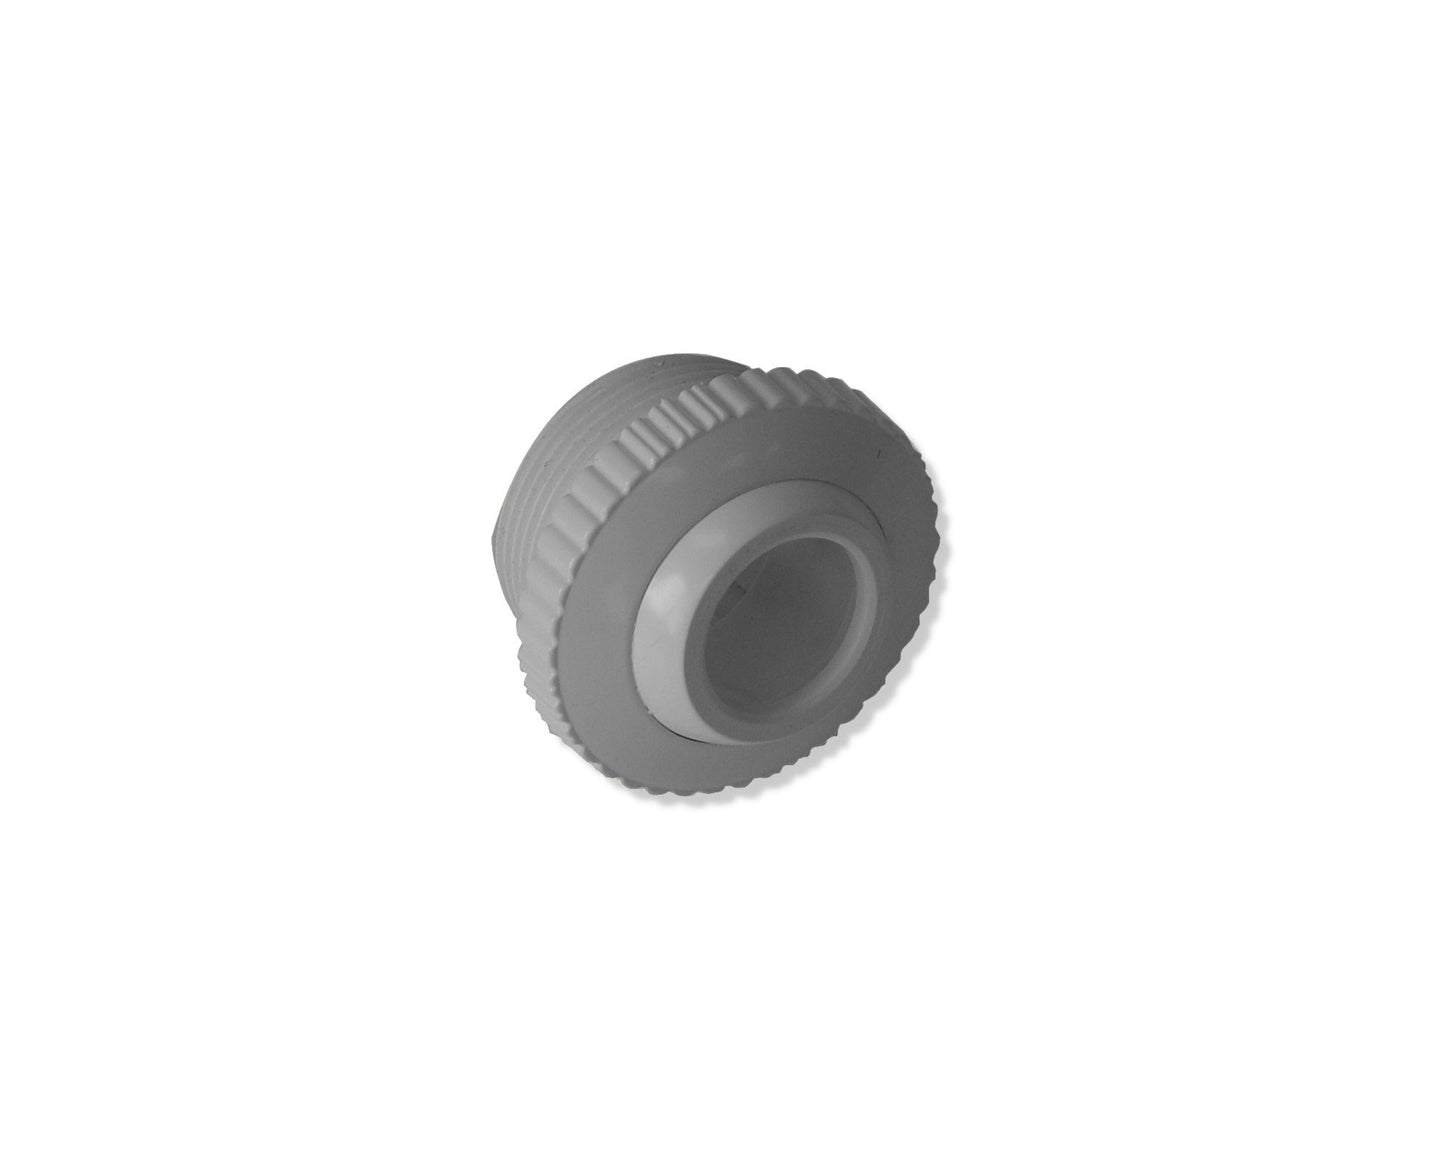 Afras Directional Flow Inlet Fitting ABS - 1/2 Inch - Light Grey